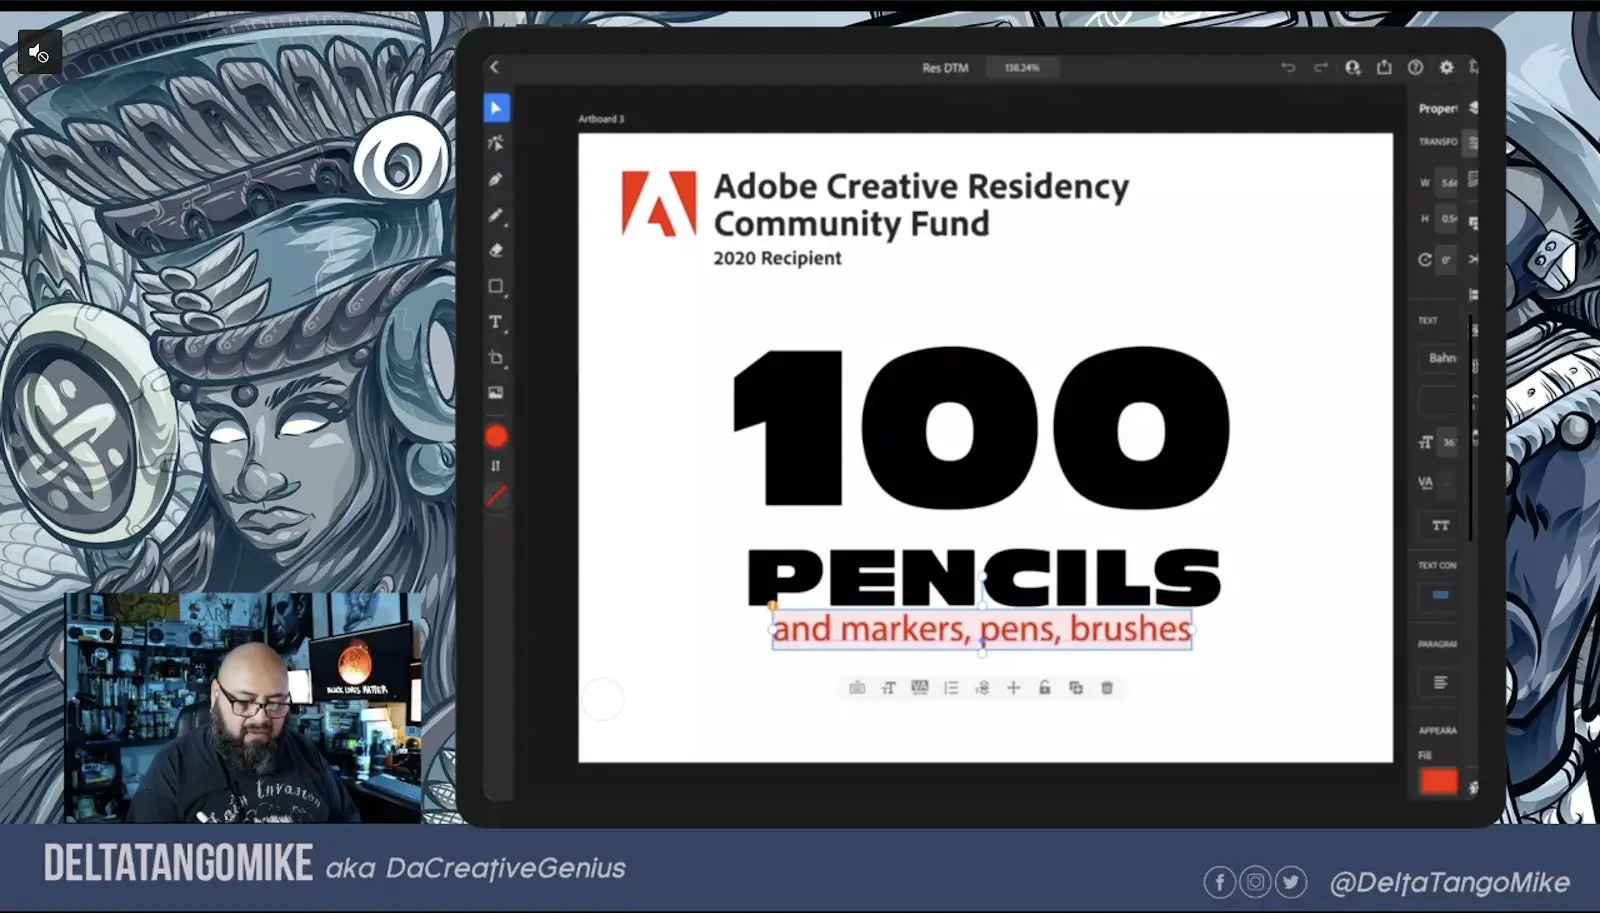 Image of 100 Pencils as a 2020 Adobe Creative Residency Community Fund Recipient